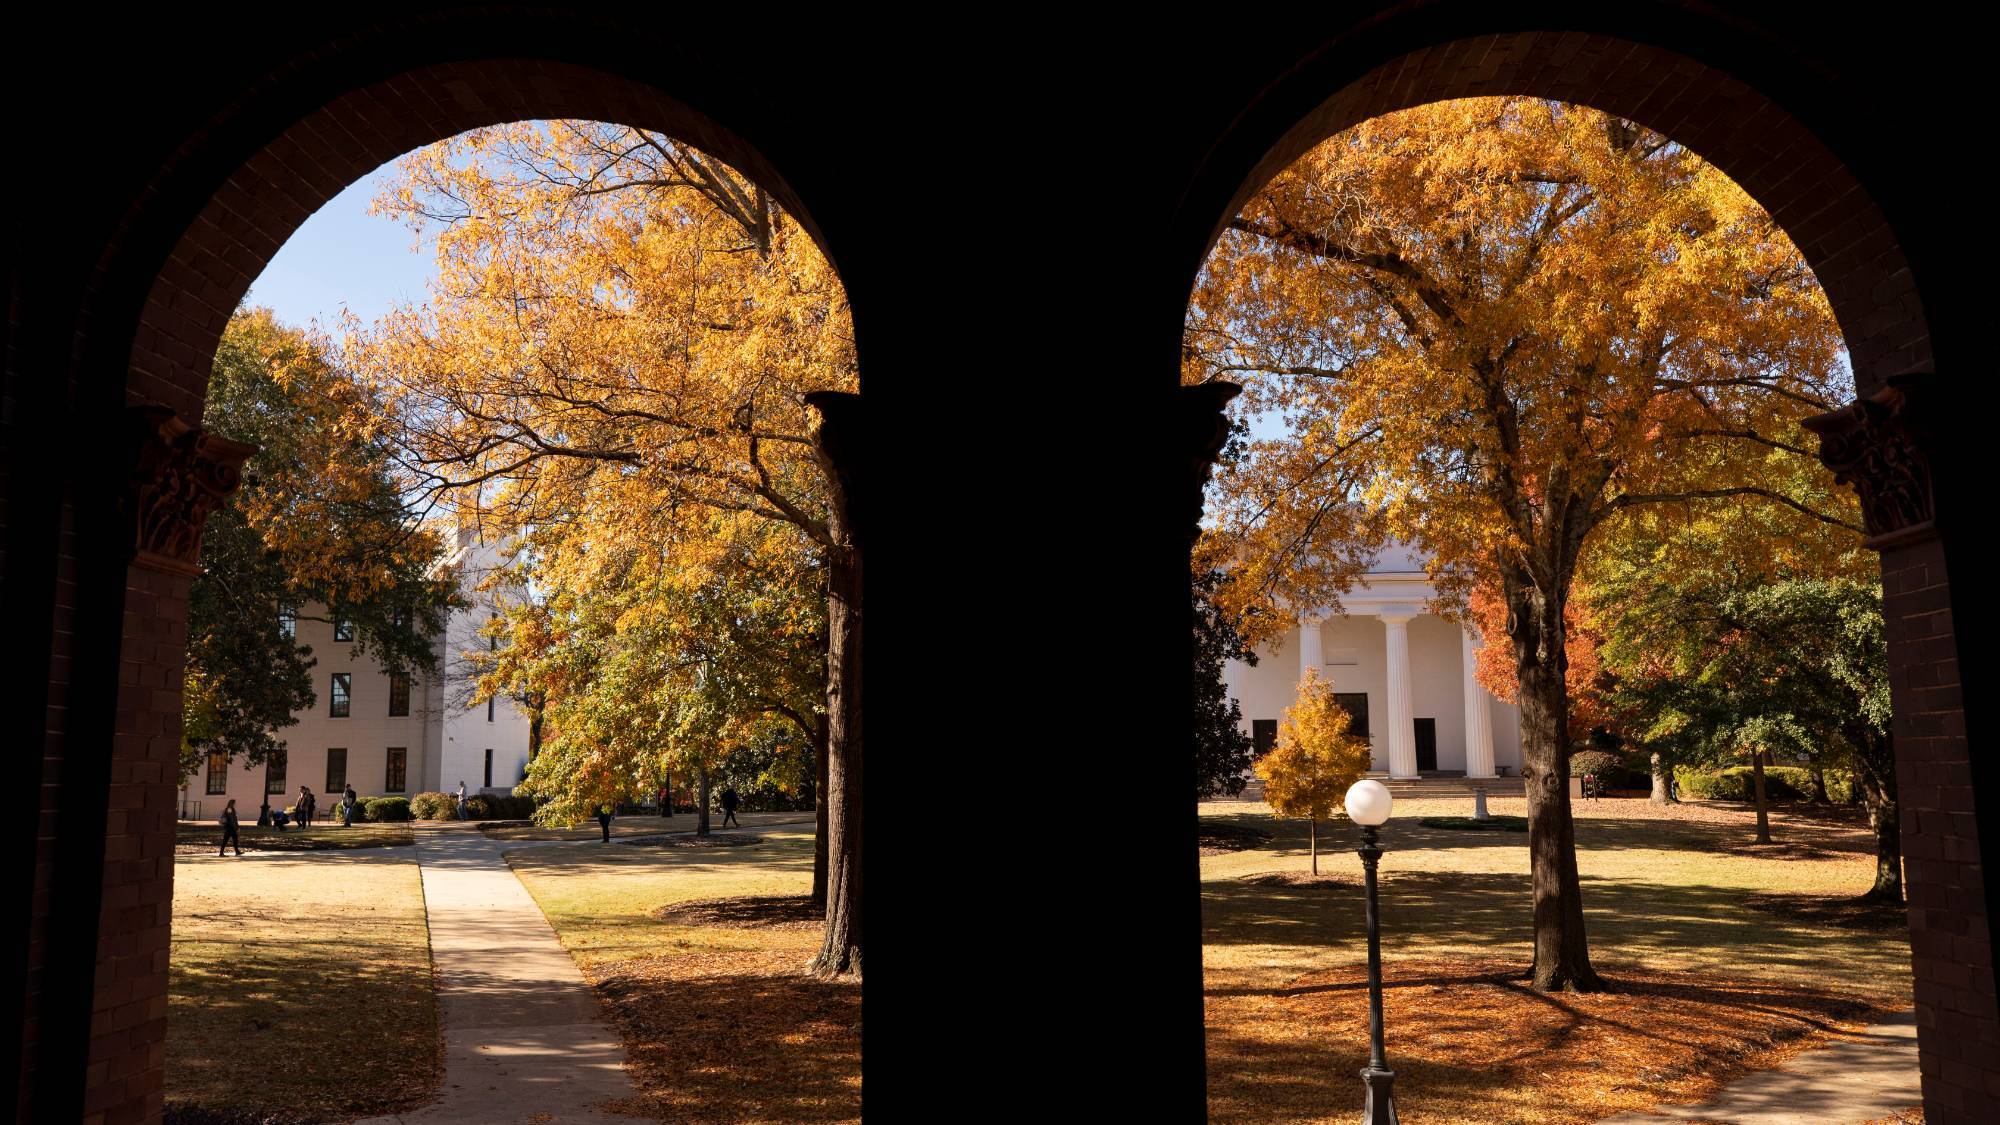 View through two brick archways to a campus quad in autumn